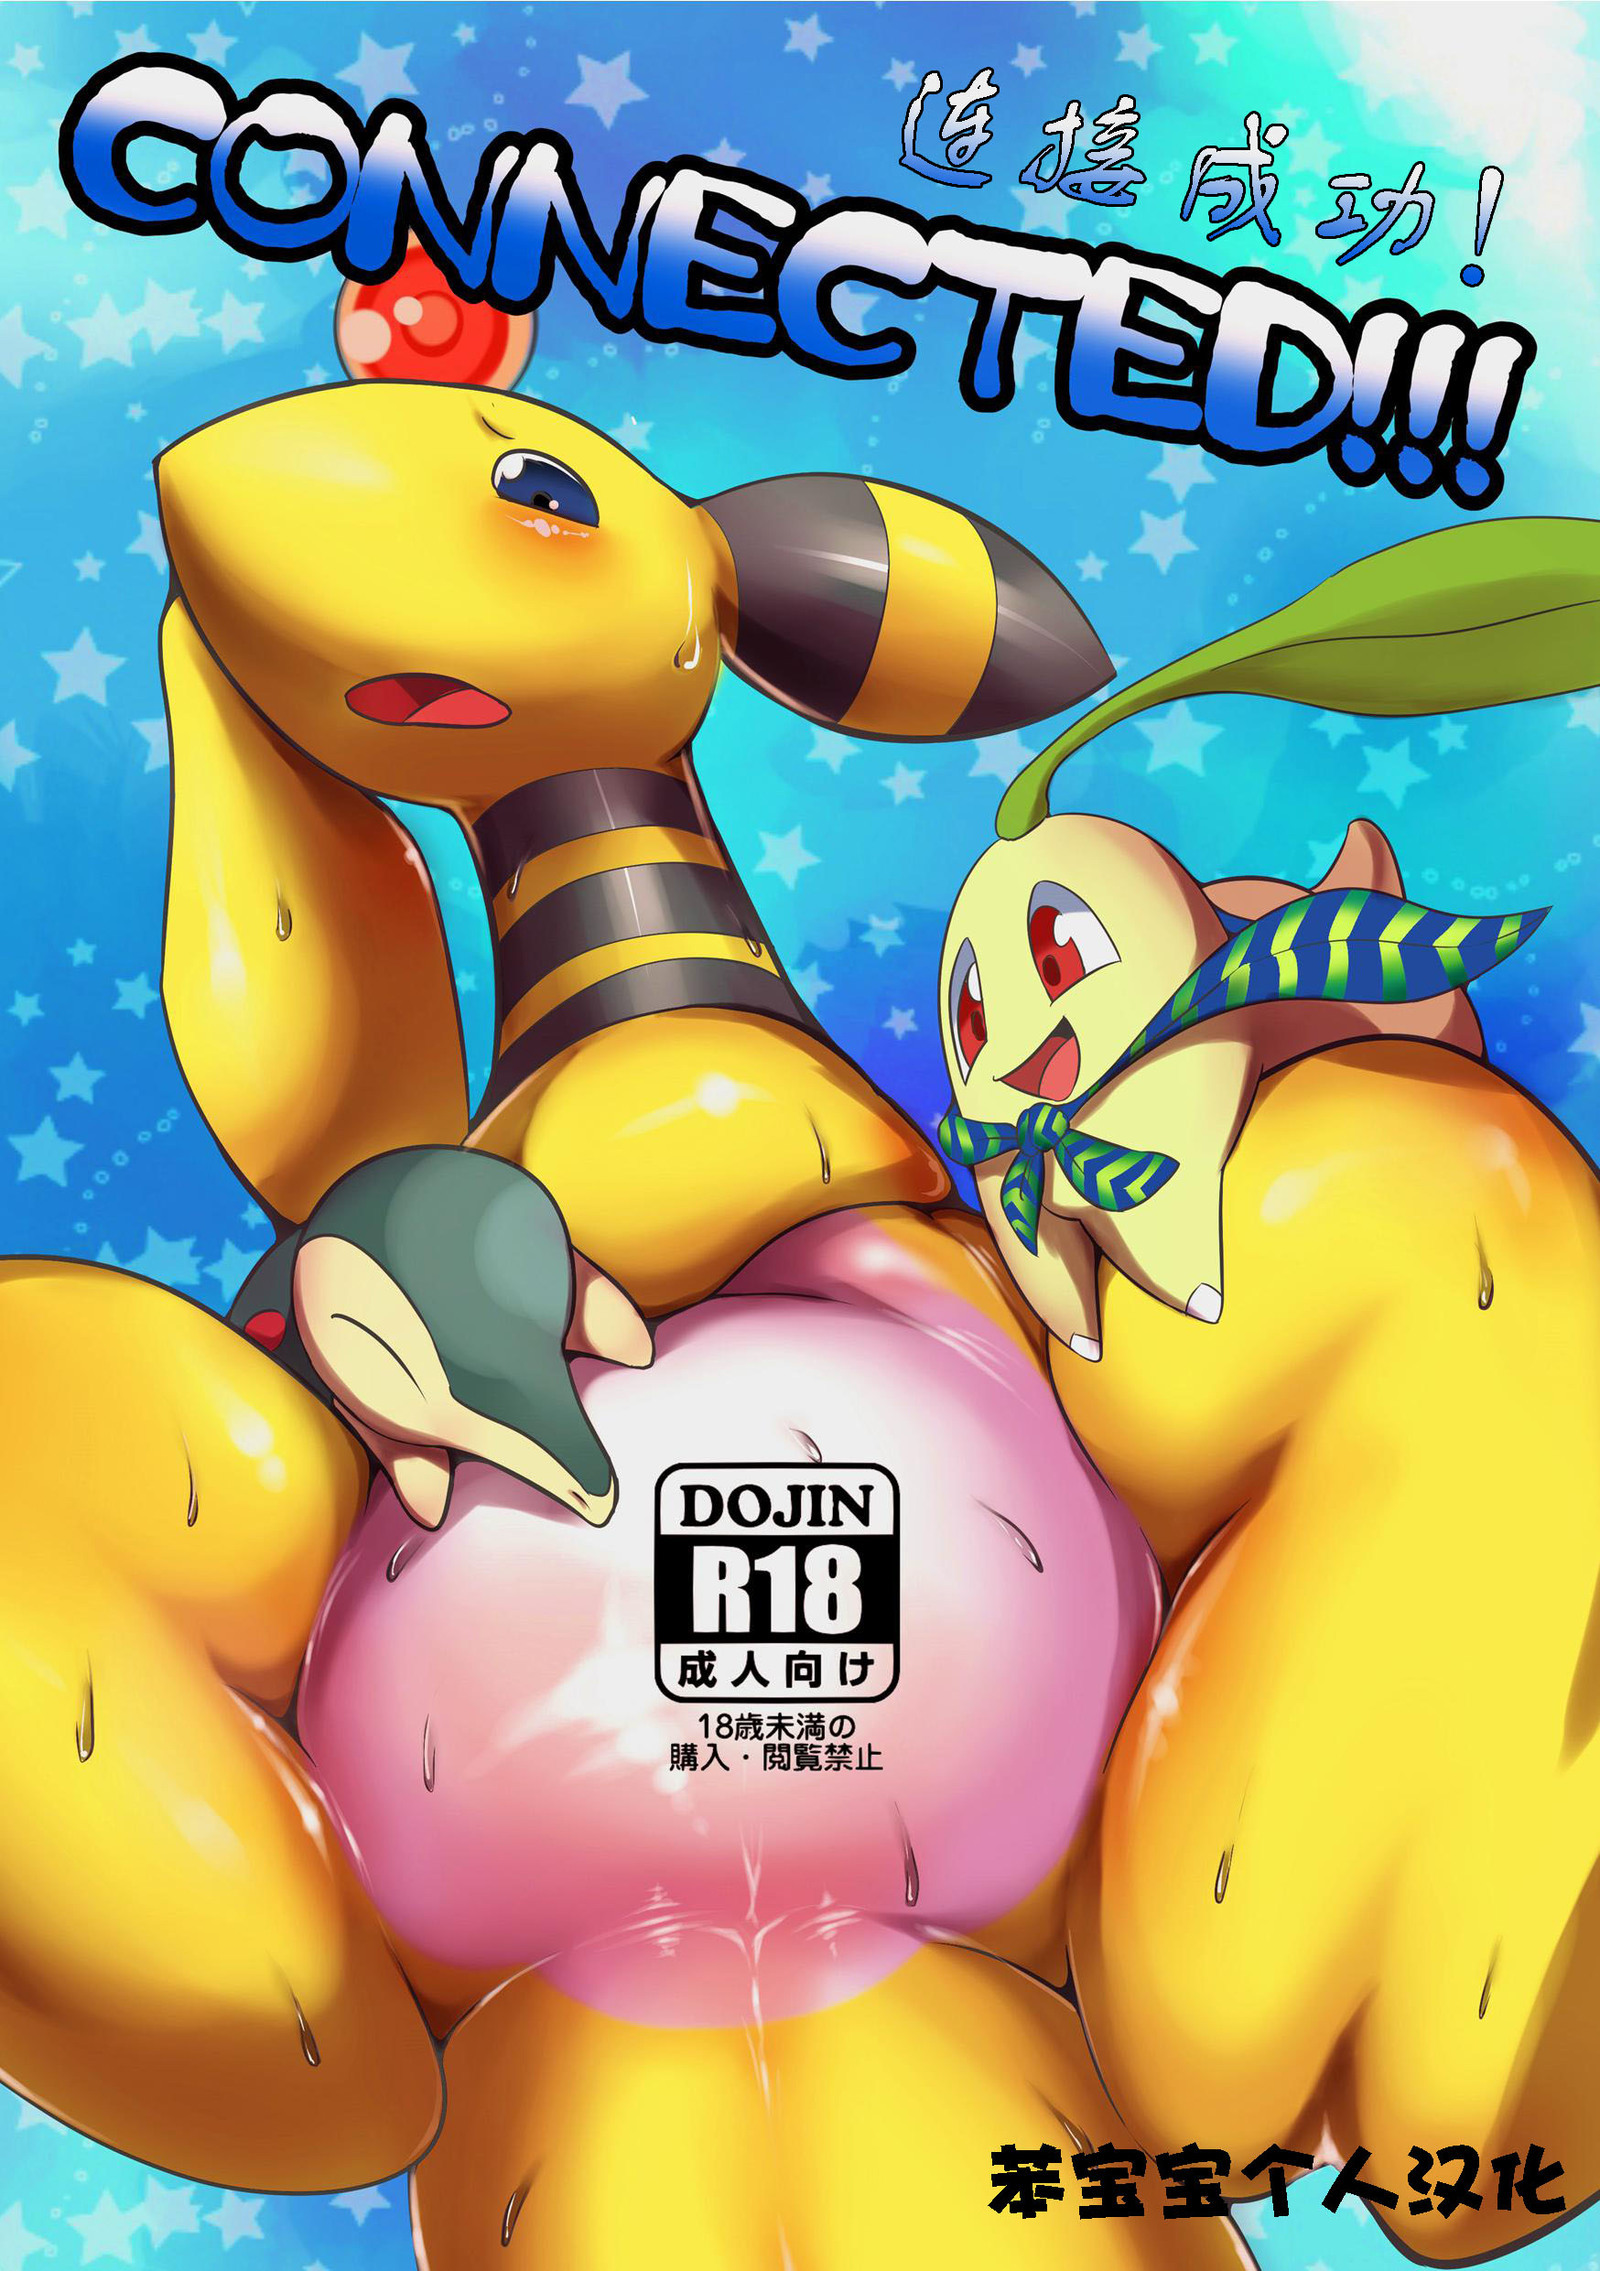 Female Ampharos Porn - mawile - sorted by number of objects - Free Hentai